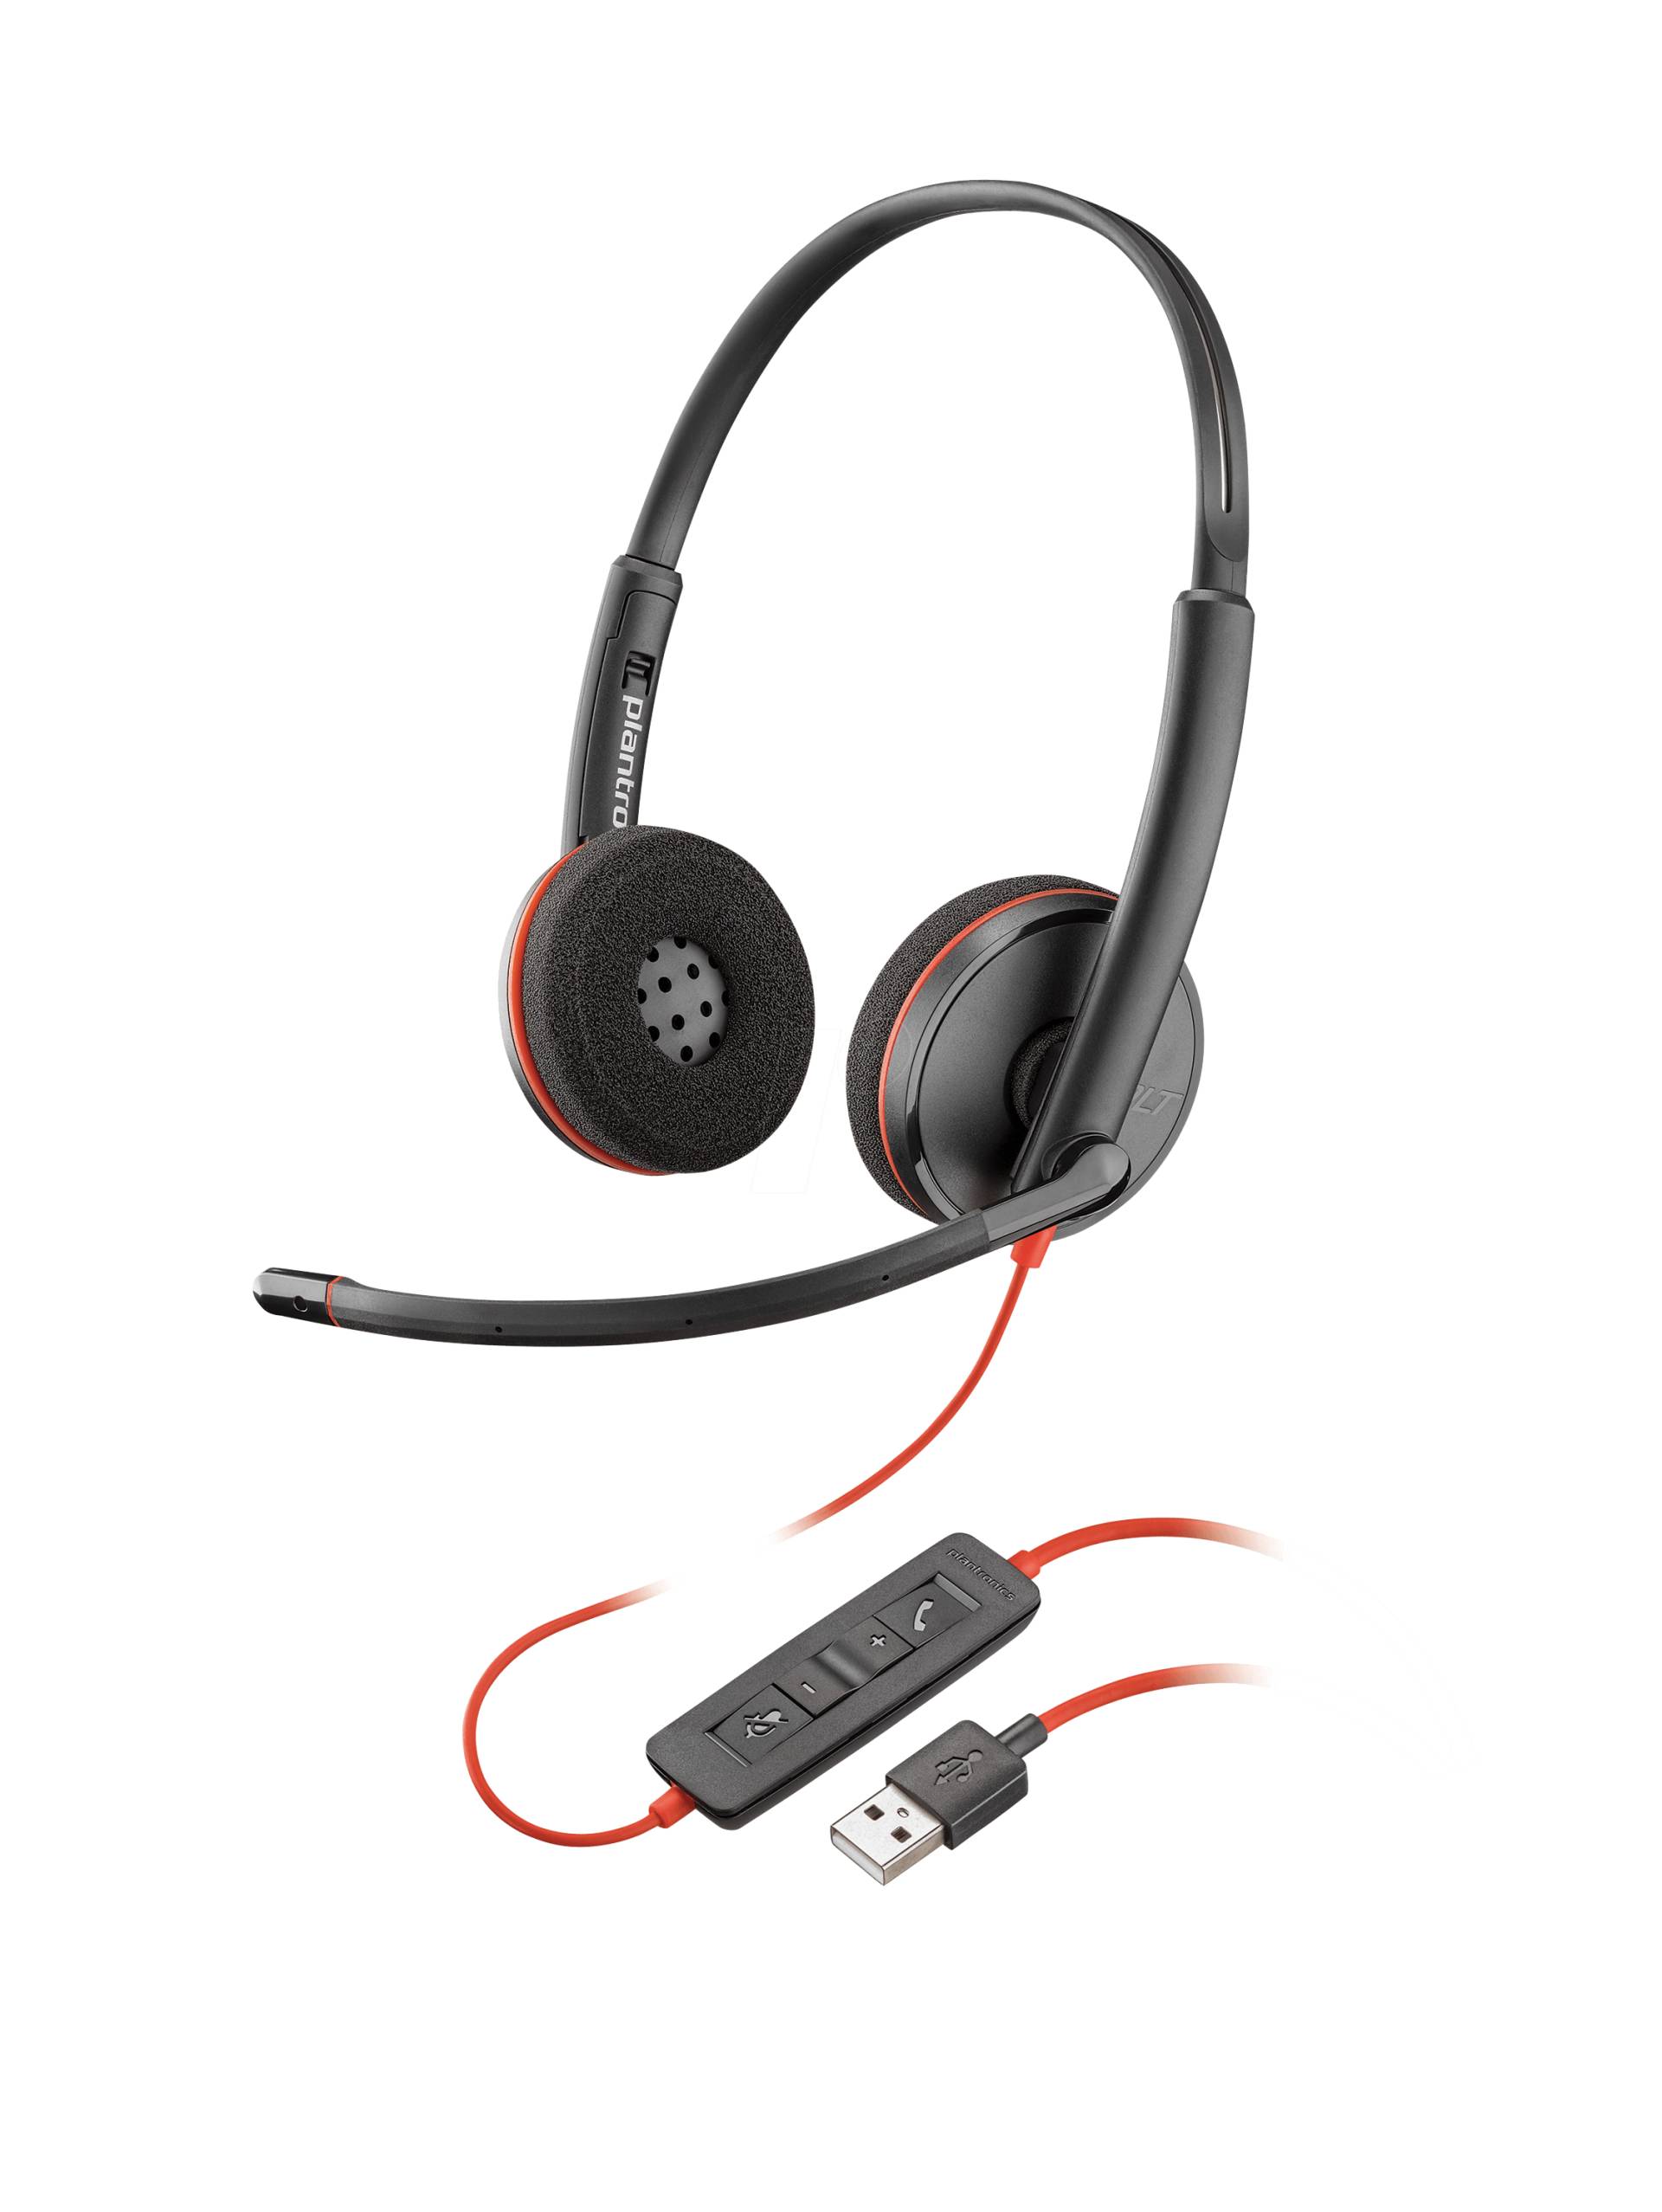 POLY BW C3220 - Headset, USB, Stereo, Blackwire 3220 von Poly